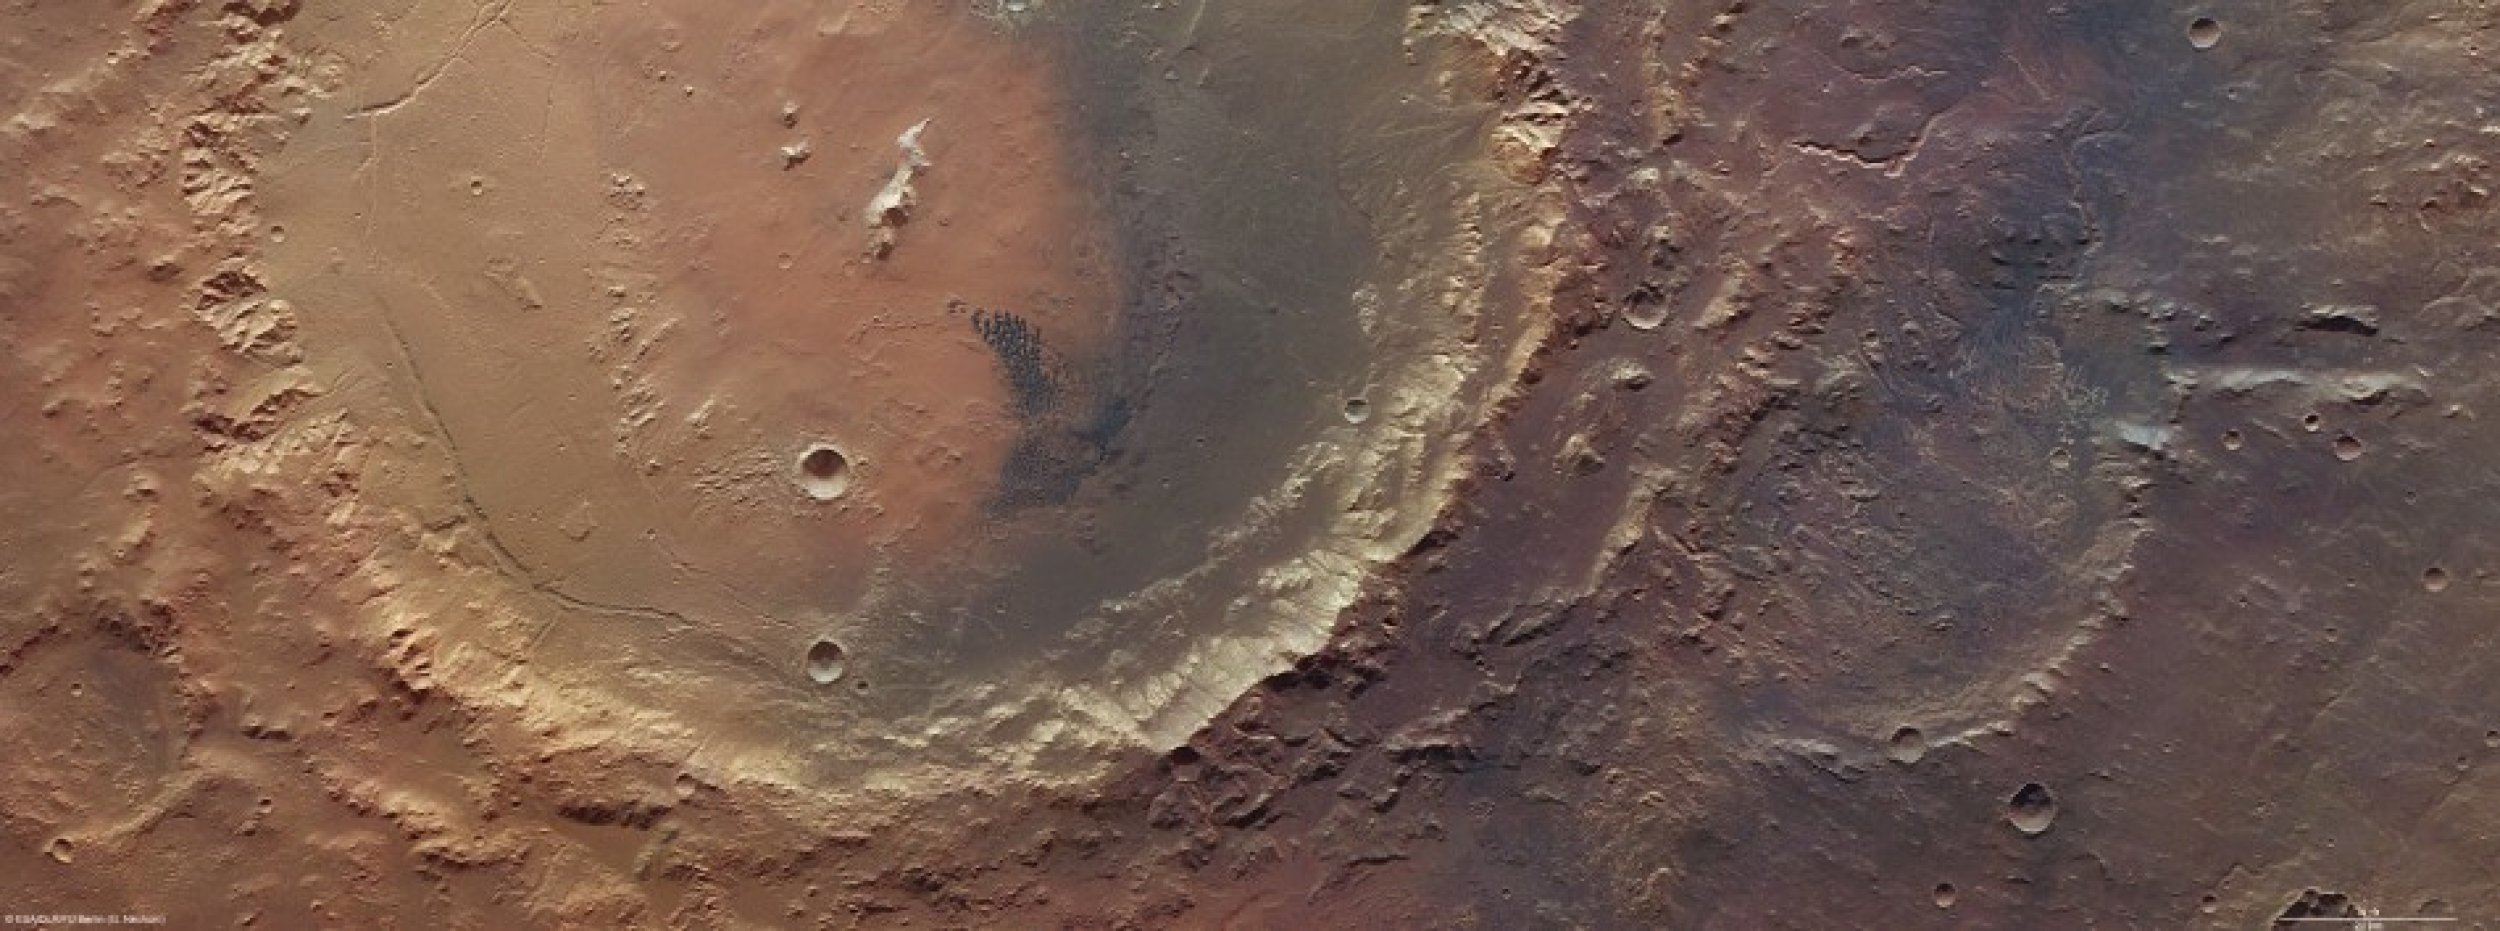 Holden and Eberswalde craters